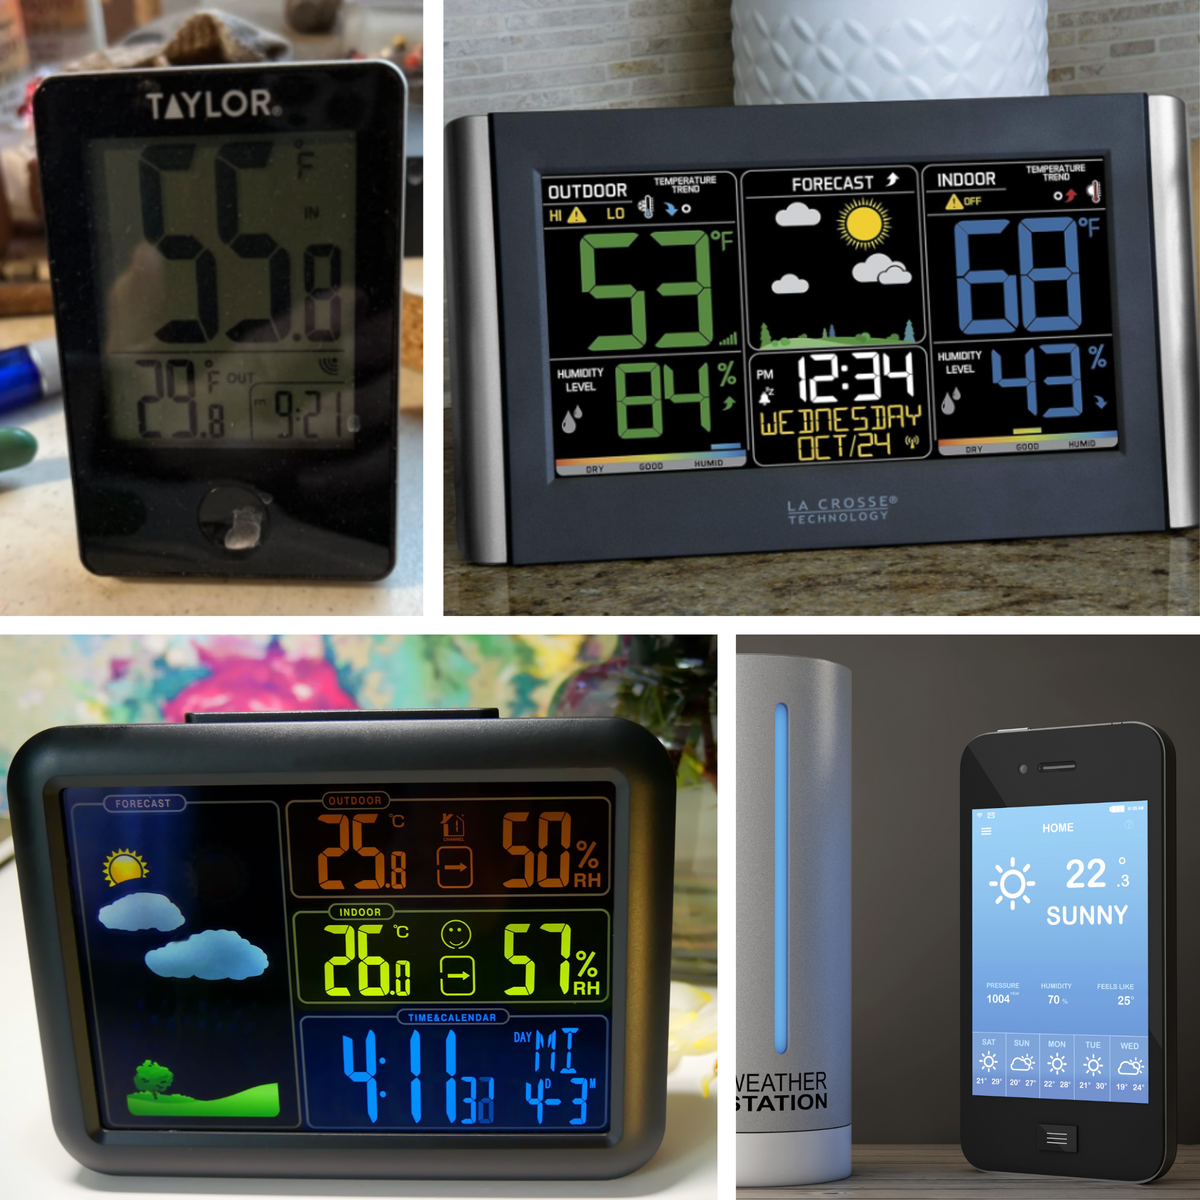 Weather stations with complex outputs and a simple indoor outdoor thermometer